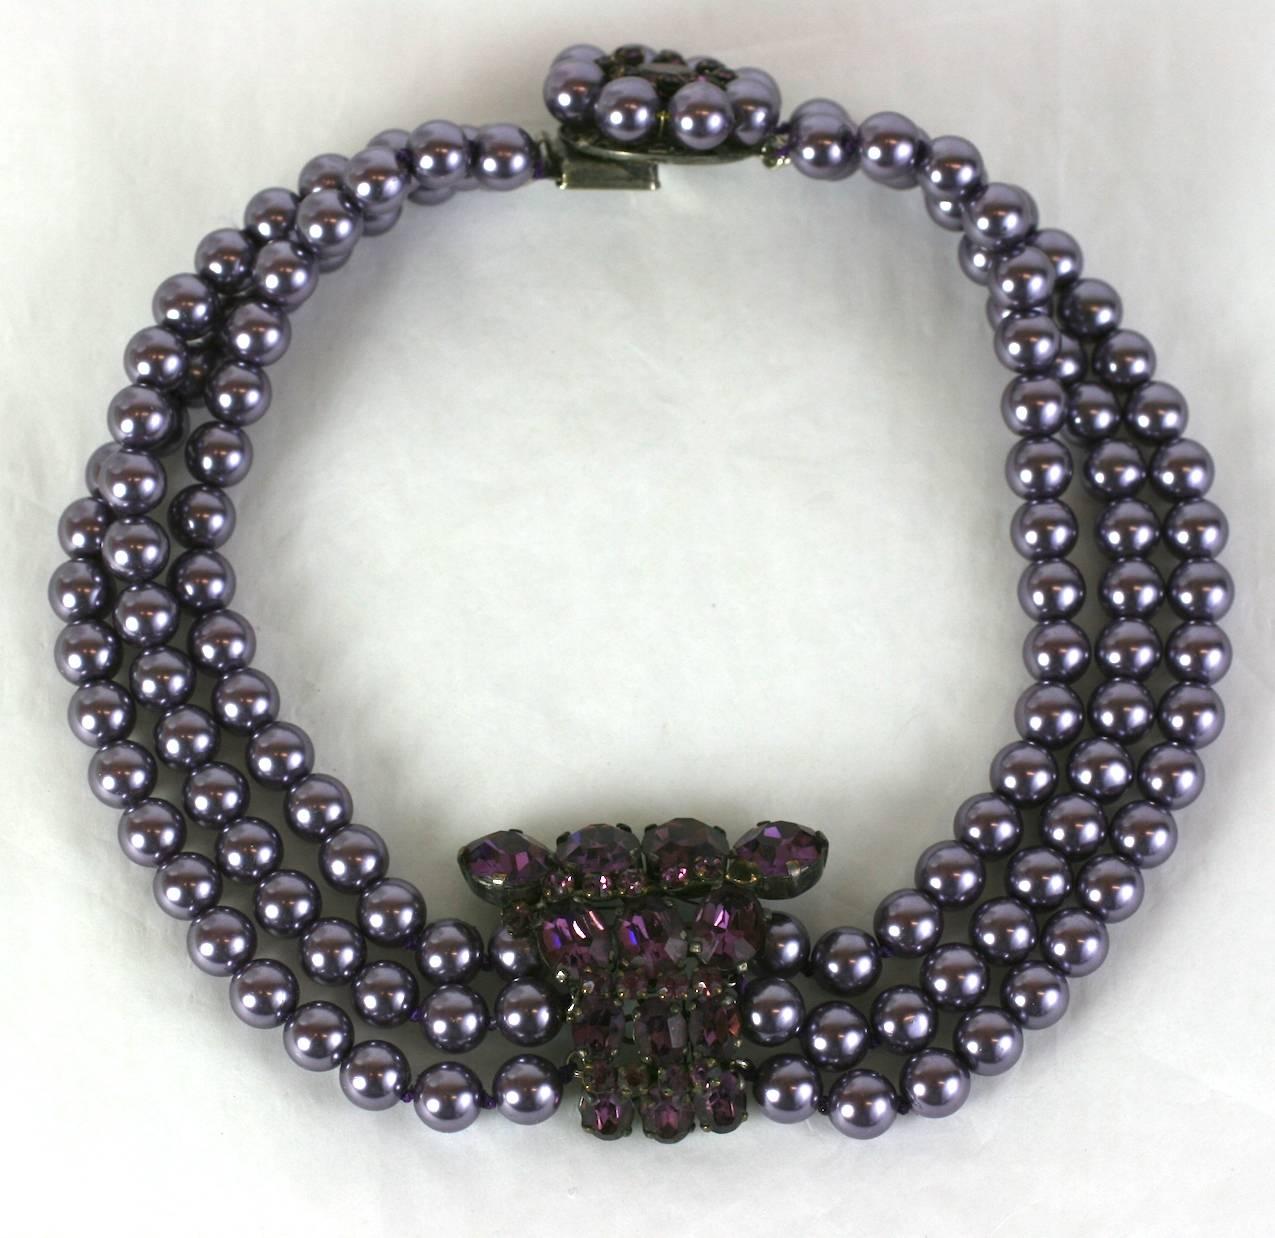 Elegant French Pearl Collar choker with 3 rows of purple faux pearls with central jeweled station and clasp. 1950's France. 
Shortest length (highest strand), 13.5